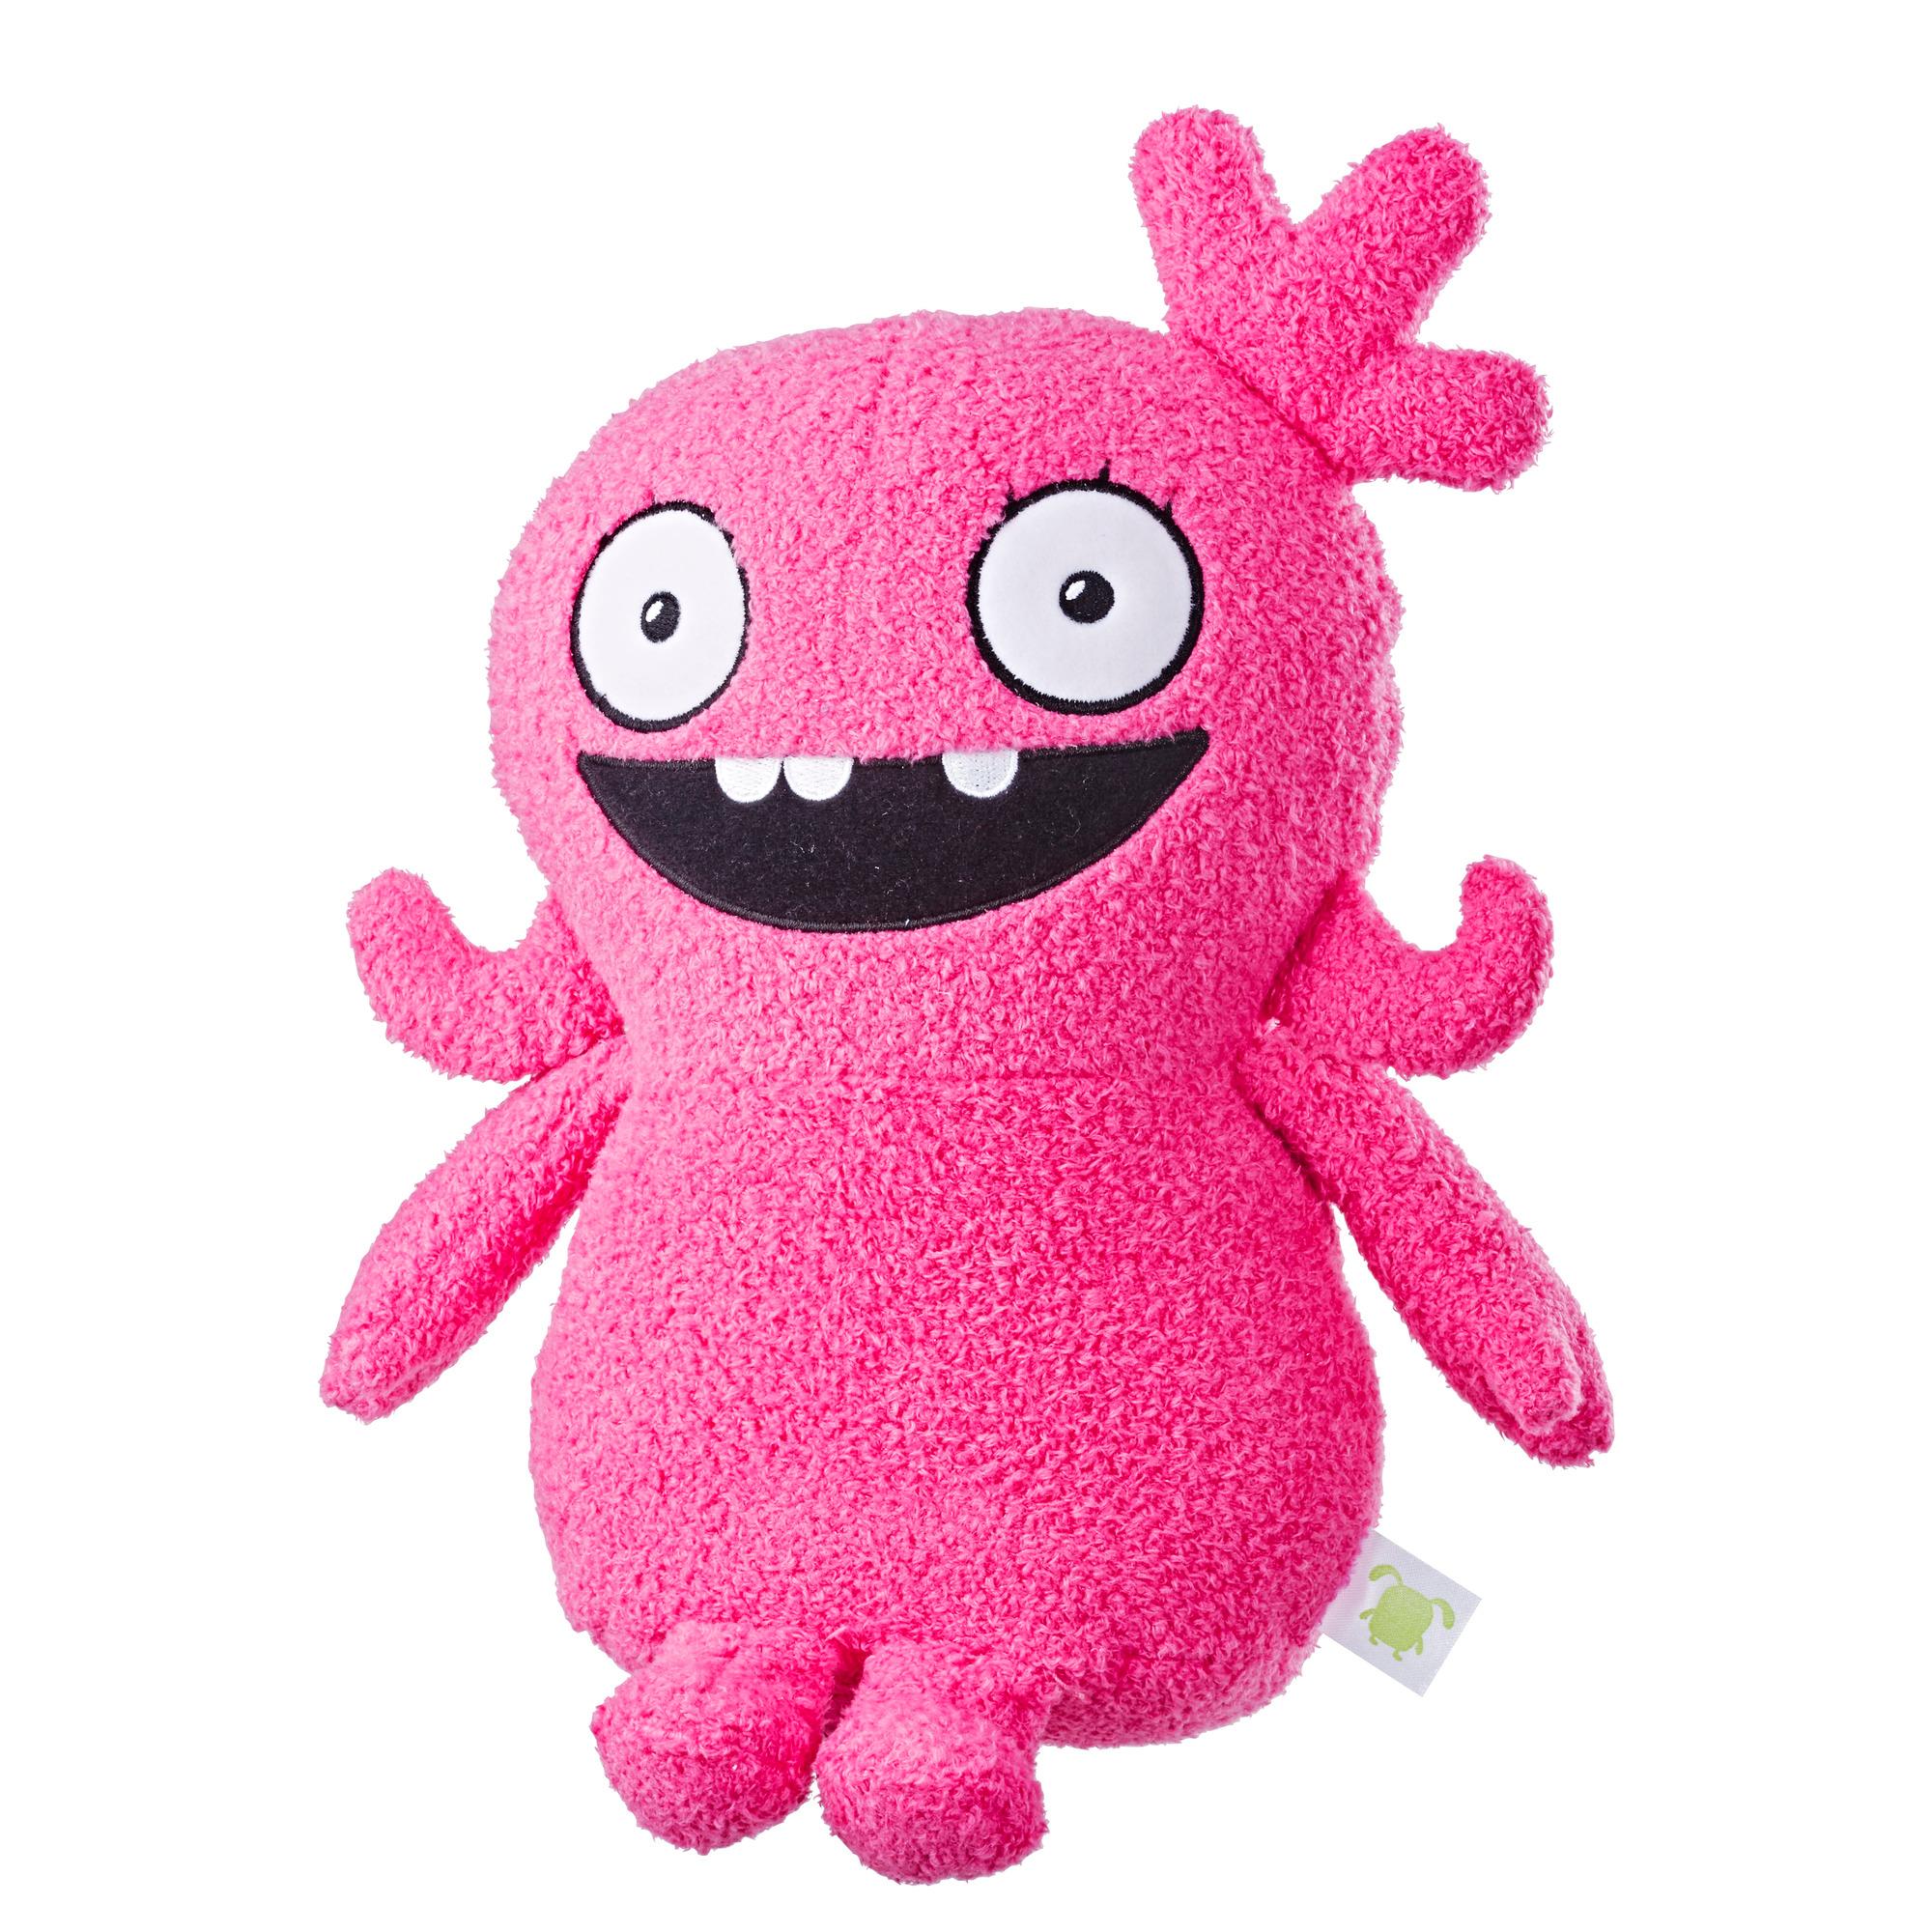 UglyDolls Feature Sounds Moxy, Stuffed Plush Toy that Talks, 11.5 inches tall